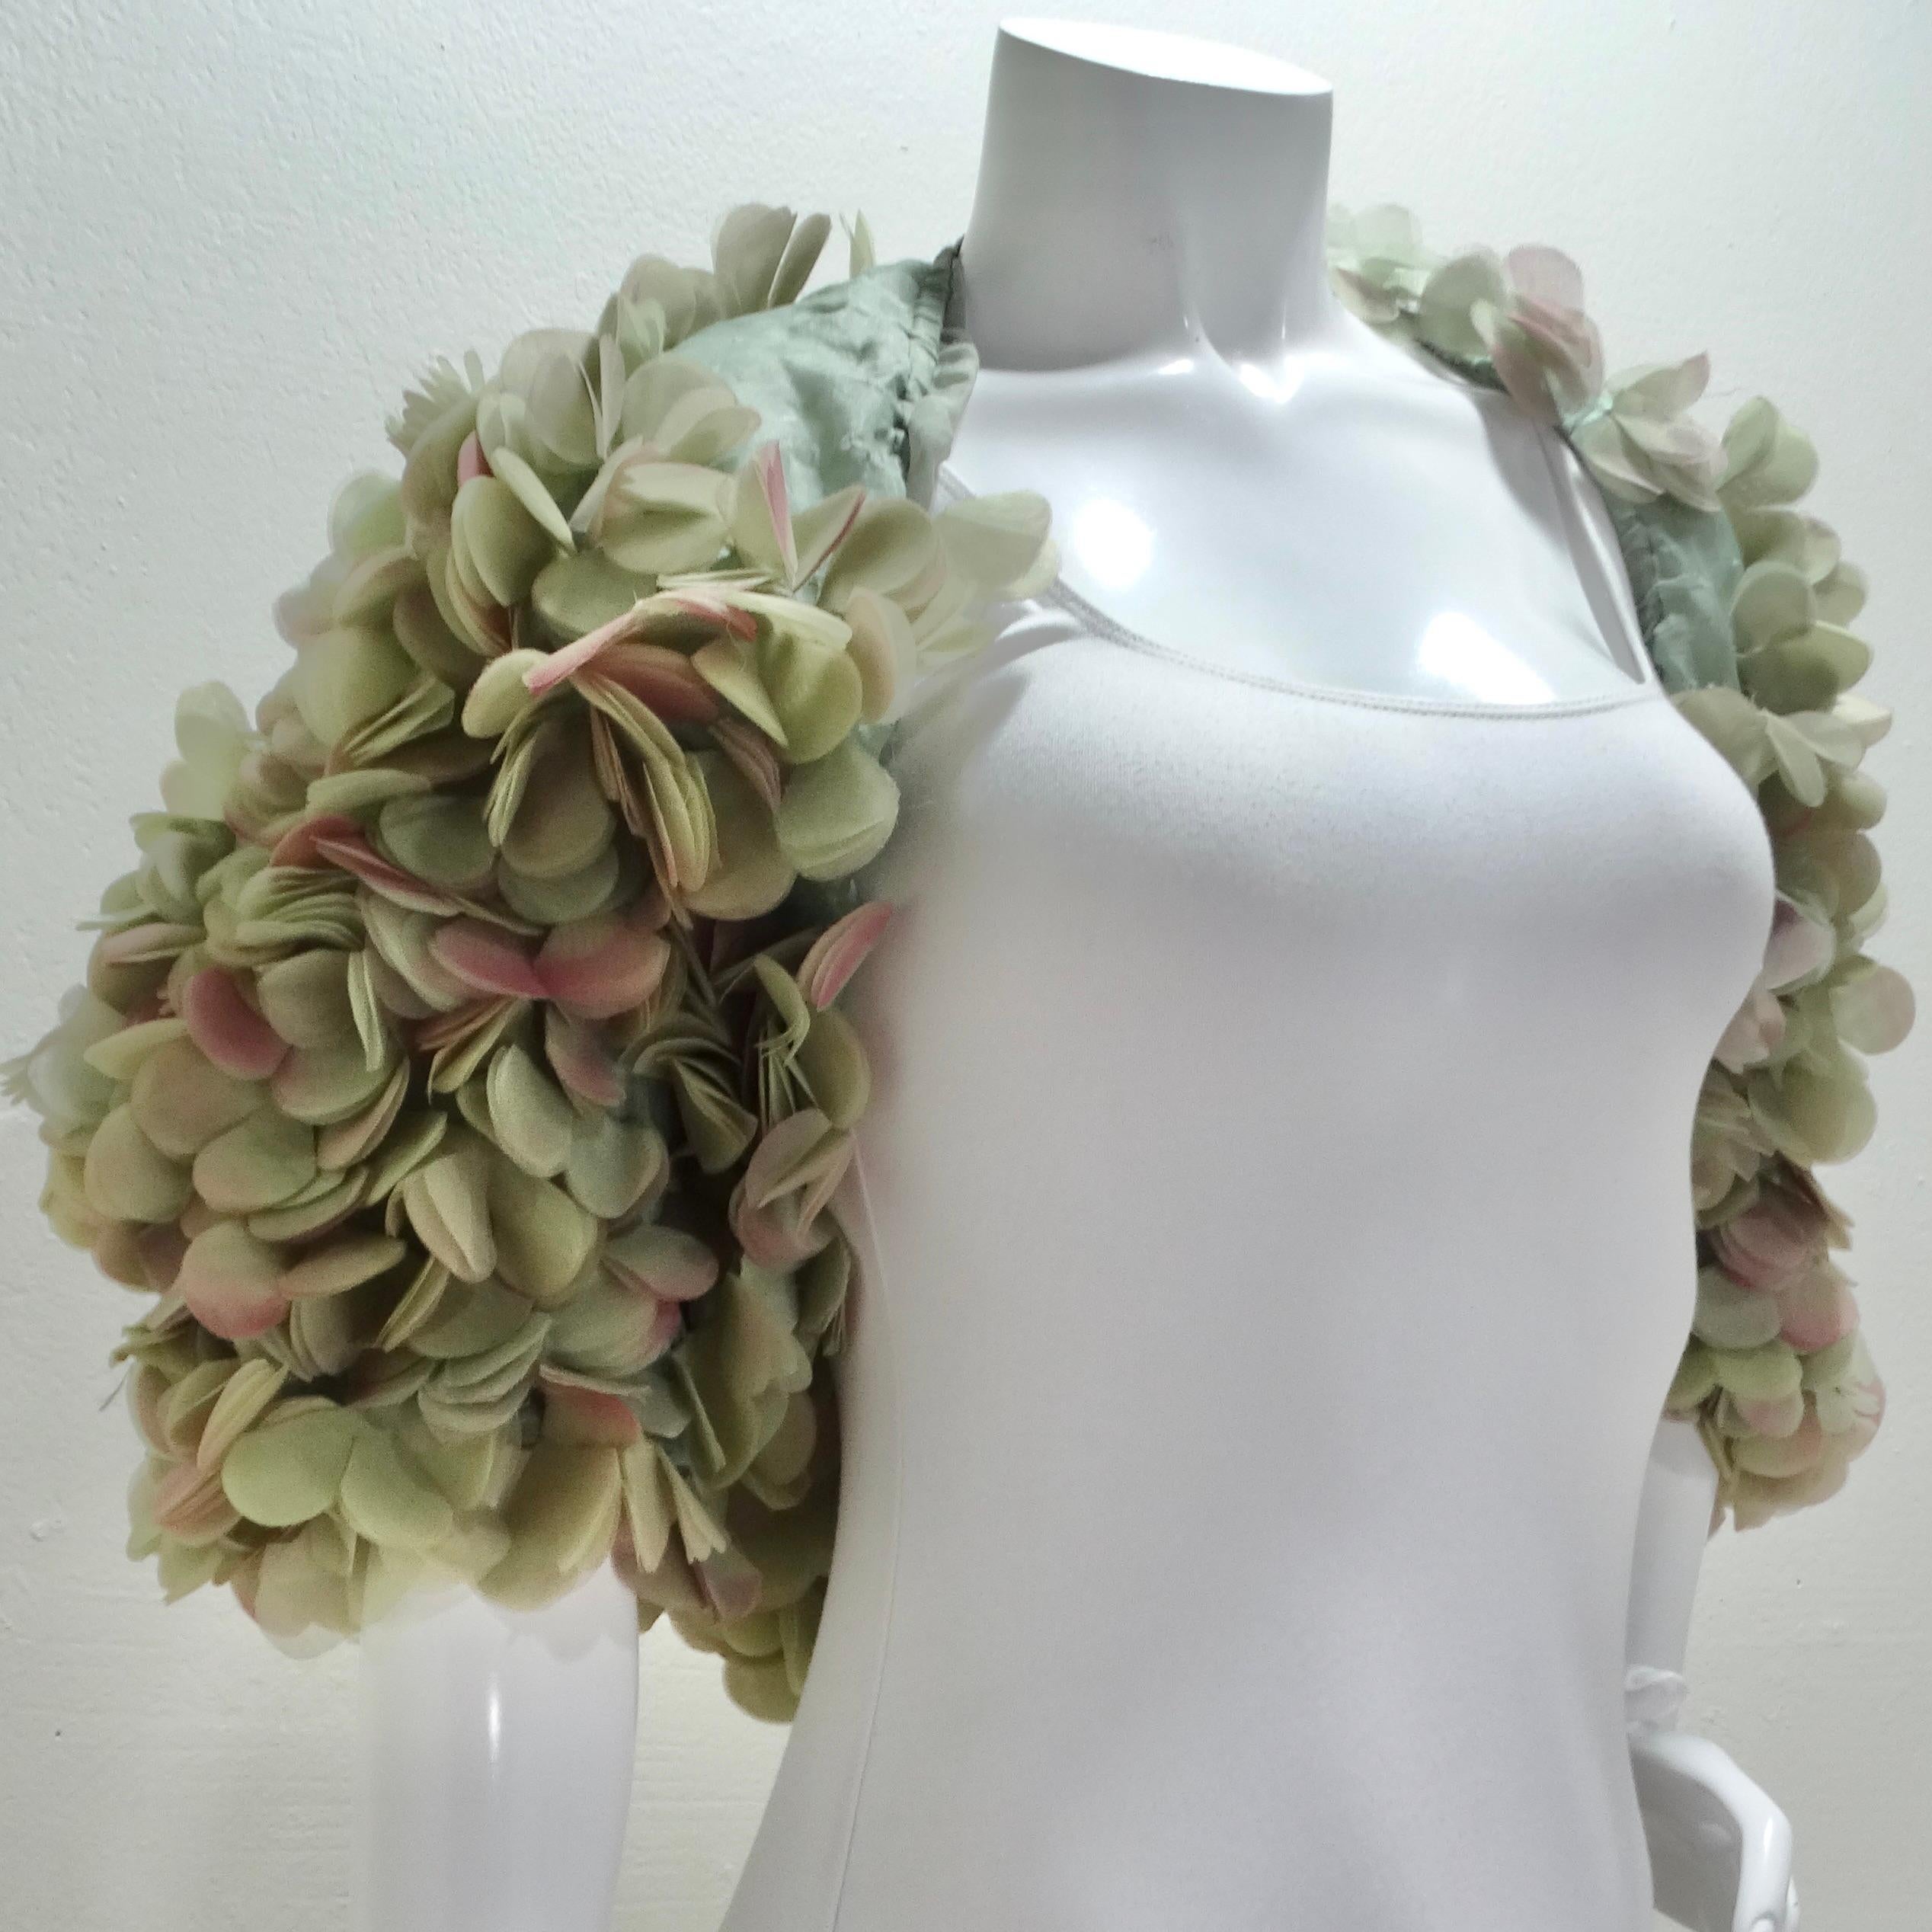 Introducing a Fashion Flashback: 1990s Randolph Duke 3D Flower Petal Applique Bolero Shrug! Step into the world of vintage glamour with our exquisite Randolph Duke bolero shrug. Crafted in the iconic 1990s style, this bolero showcases the